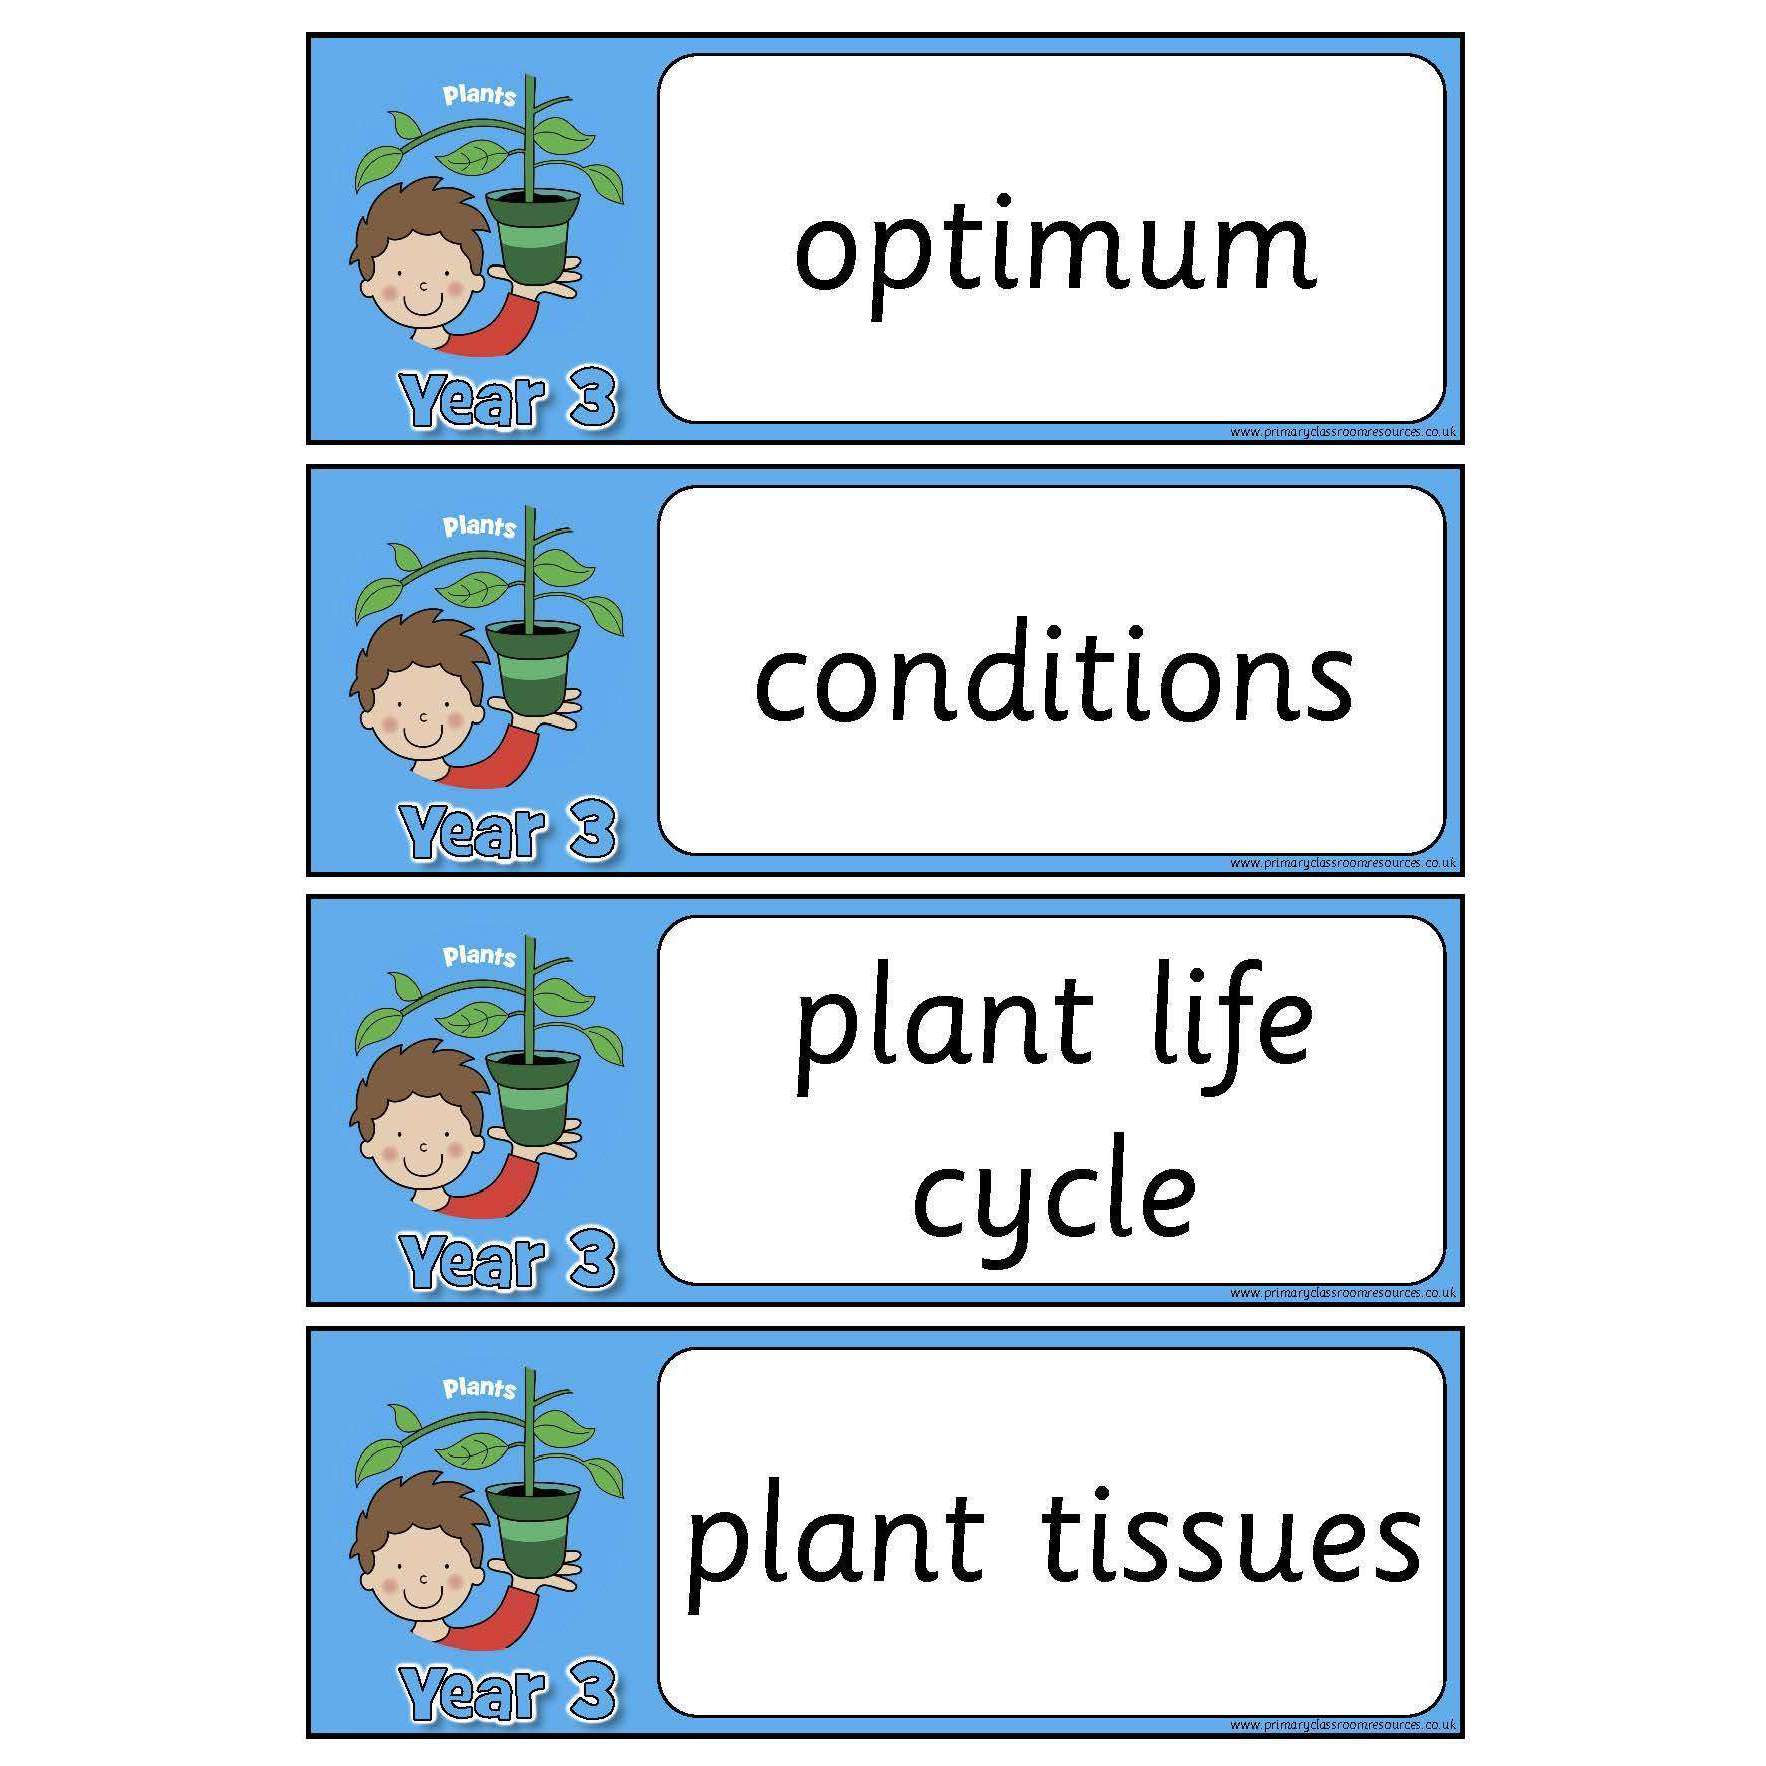 Year 3 Science Vocabulary - Plants:Primary Classroom Resources